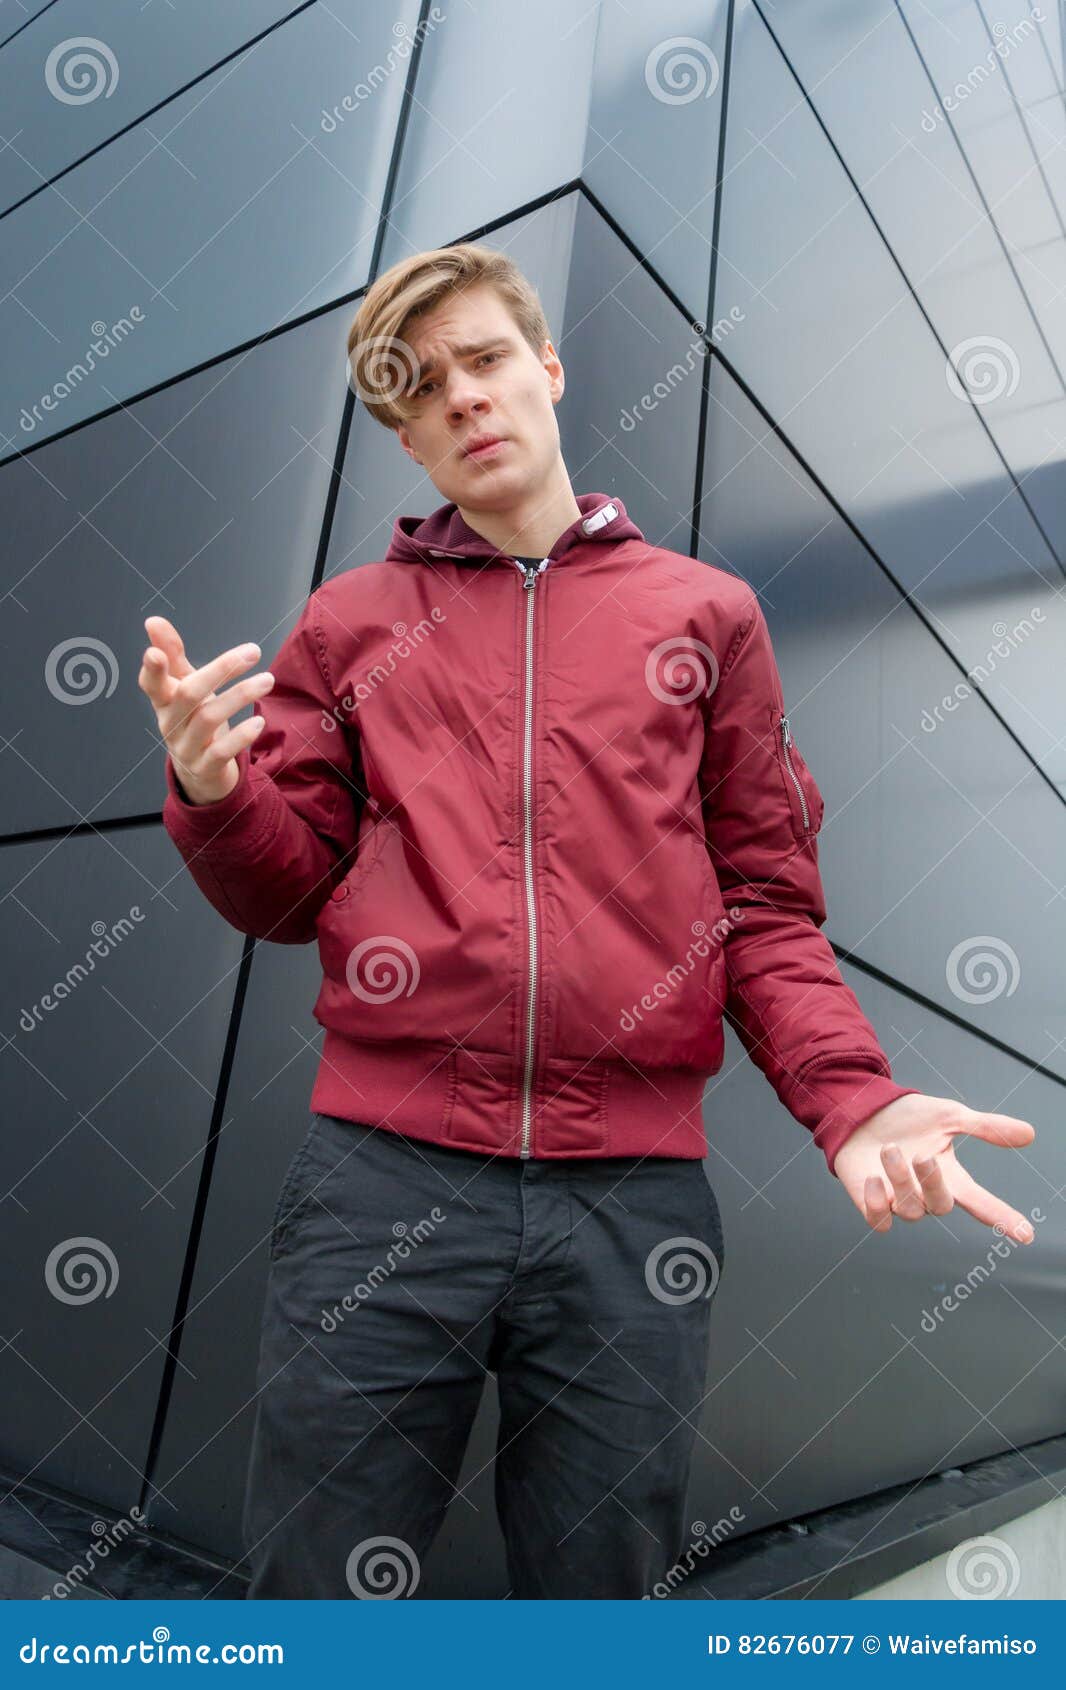 teen boy gesticulating to express doubt about decision